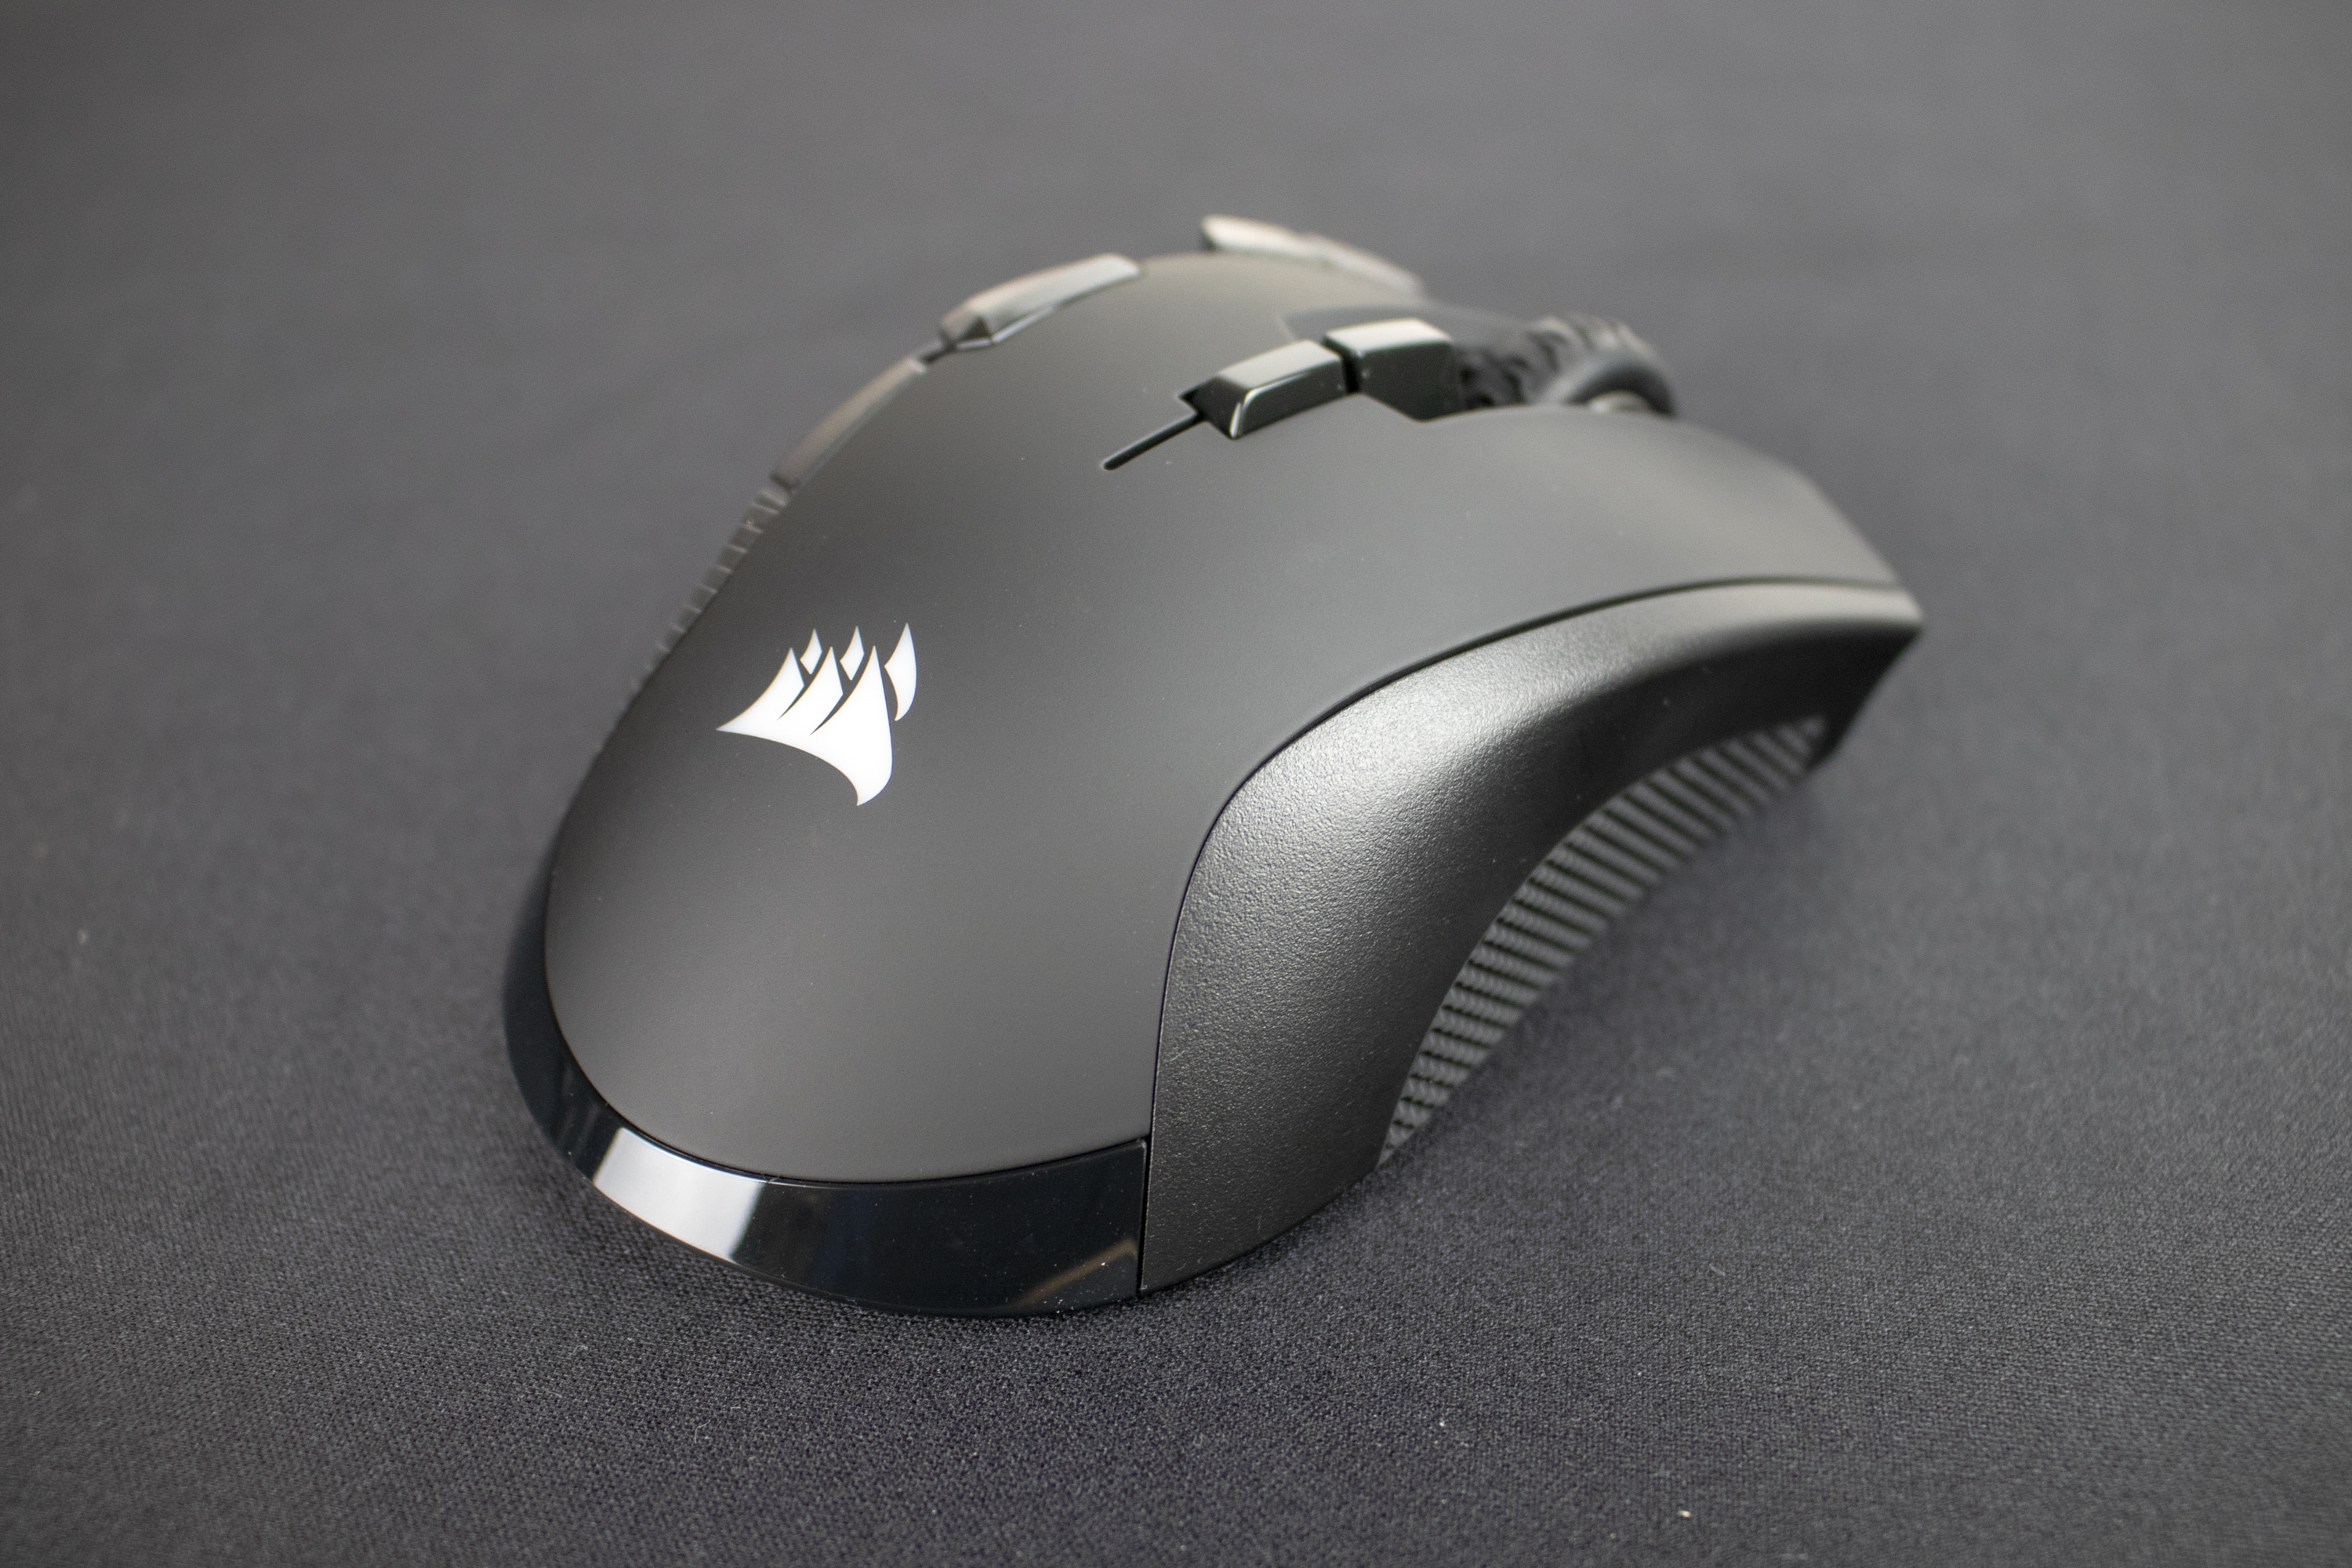 Corsair Ironclaw RGB Wireless Gaming Mouse Review